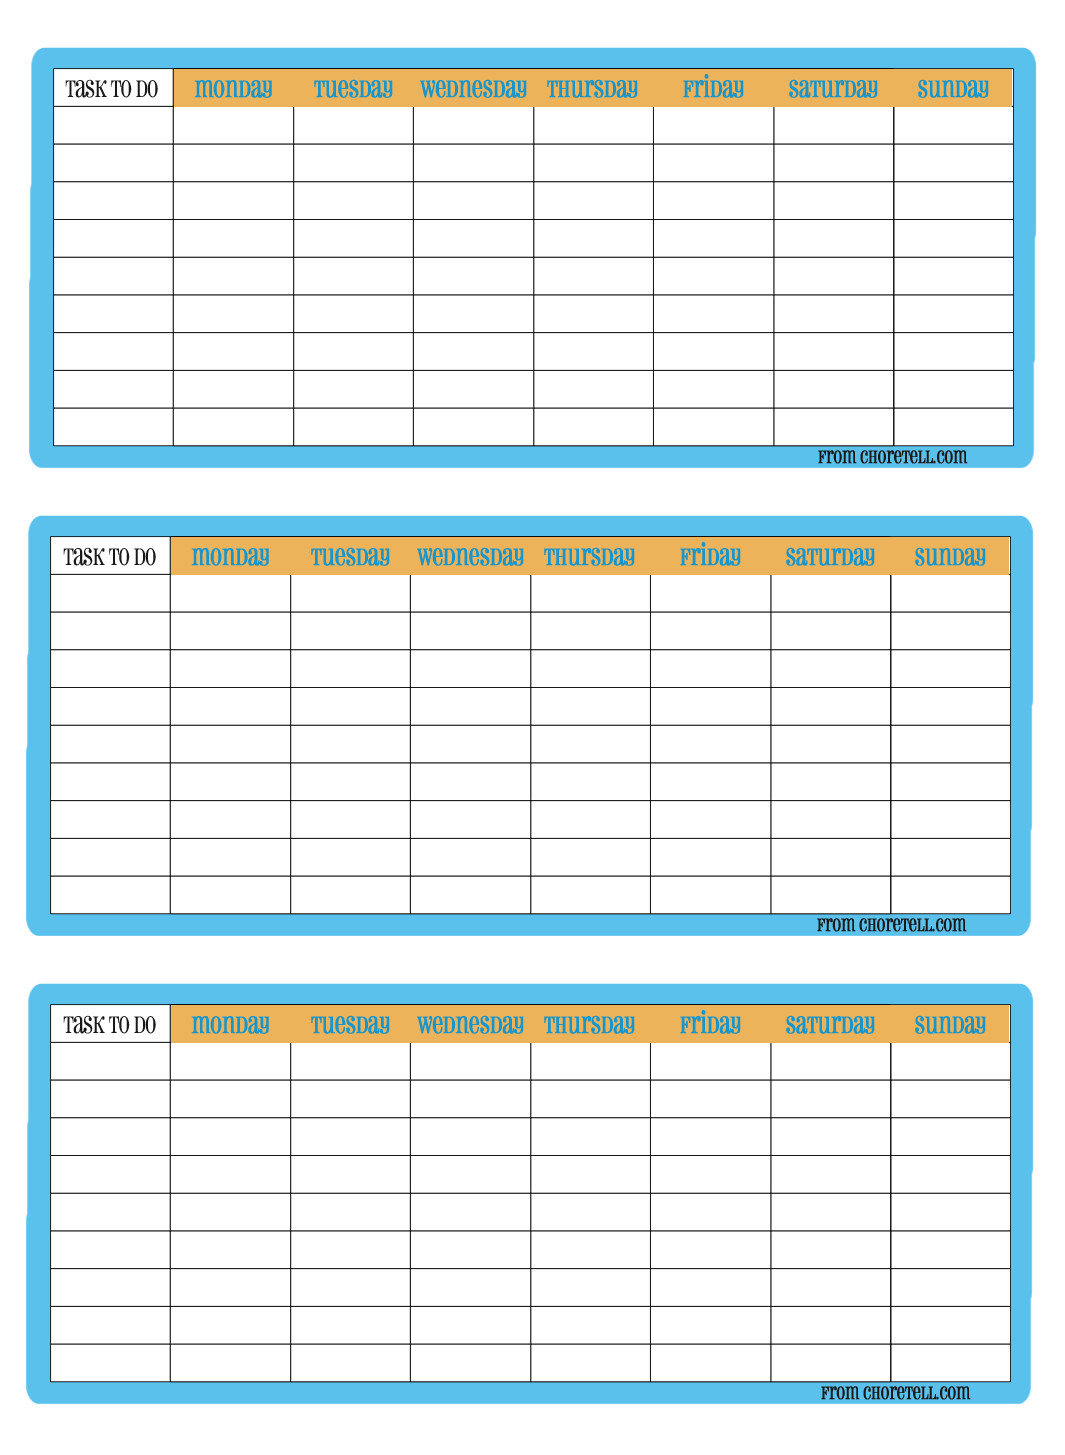 3 up printable weekly chore charts from ChoreTell